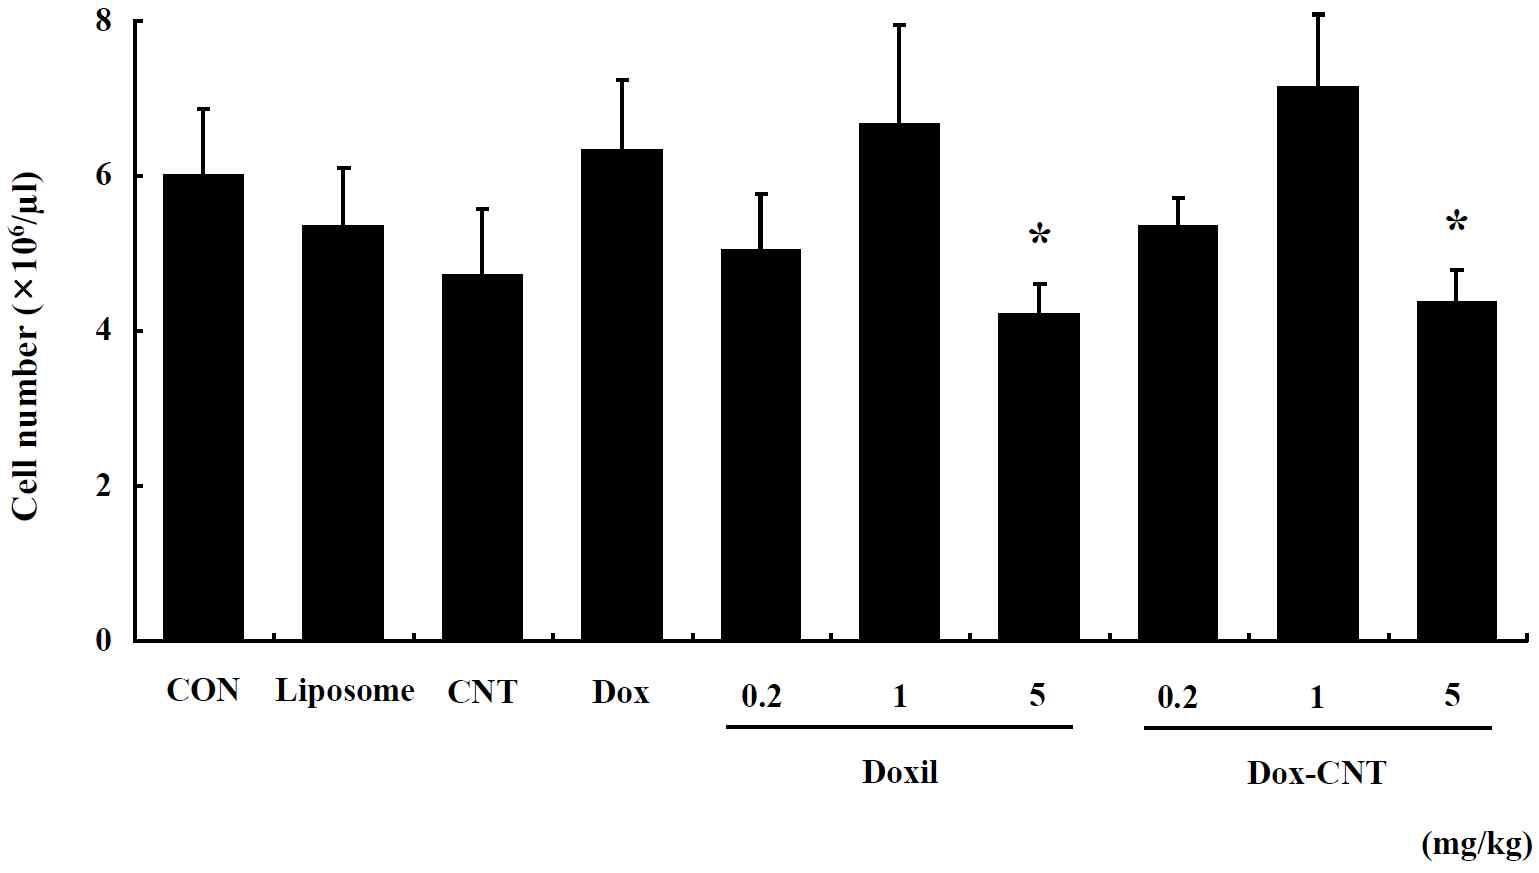 Red blood cell counts in single exposed male ICR mice for 14 days. Mice were respectively administered by intravenous injection with liposome, CNT, Dox, Doxil (0.2, 1, 5 mg/kg) and Dox-CNT (0.2, 1, 5 mg/kg). The results are presented as mean ± SE (n = 10). * p < 0.05, significantly different from the control.